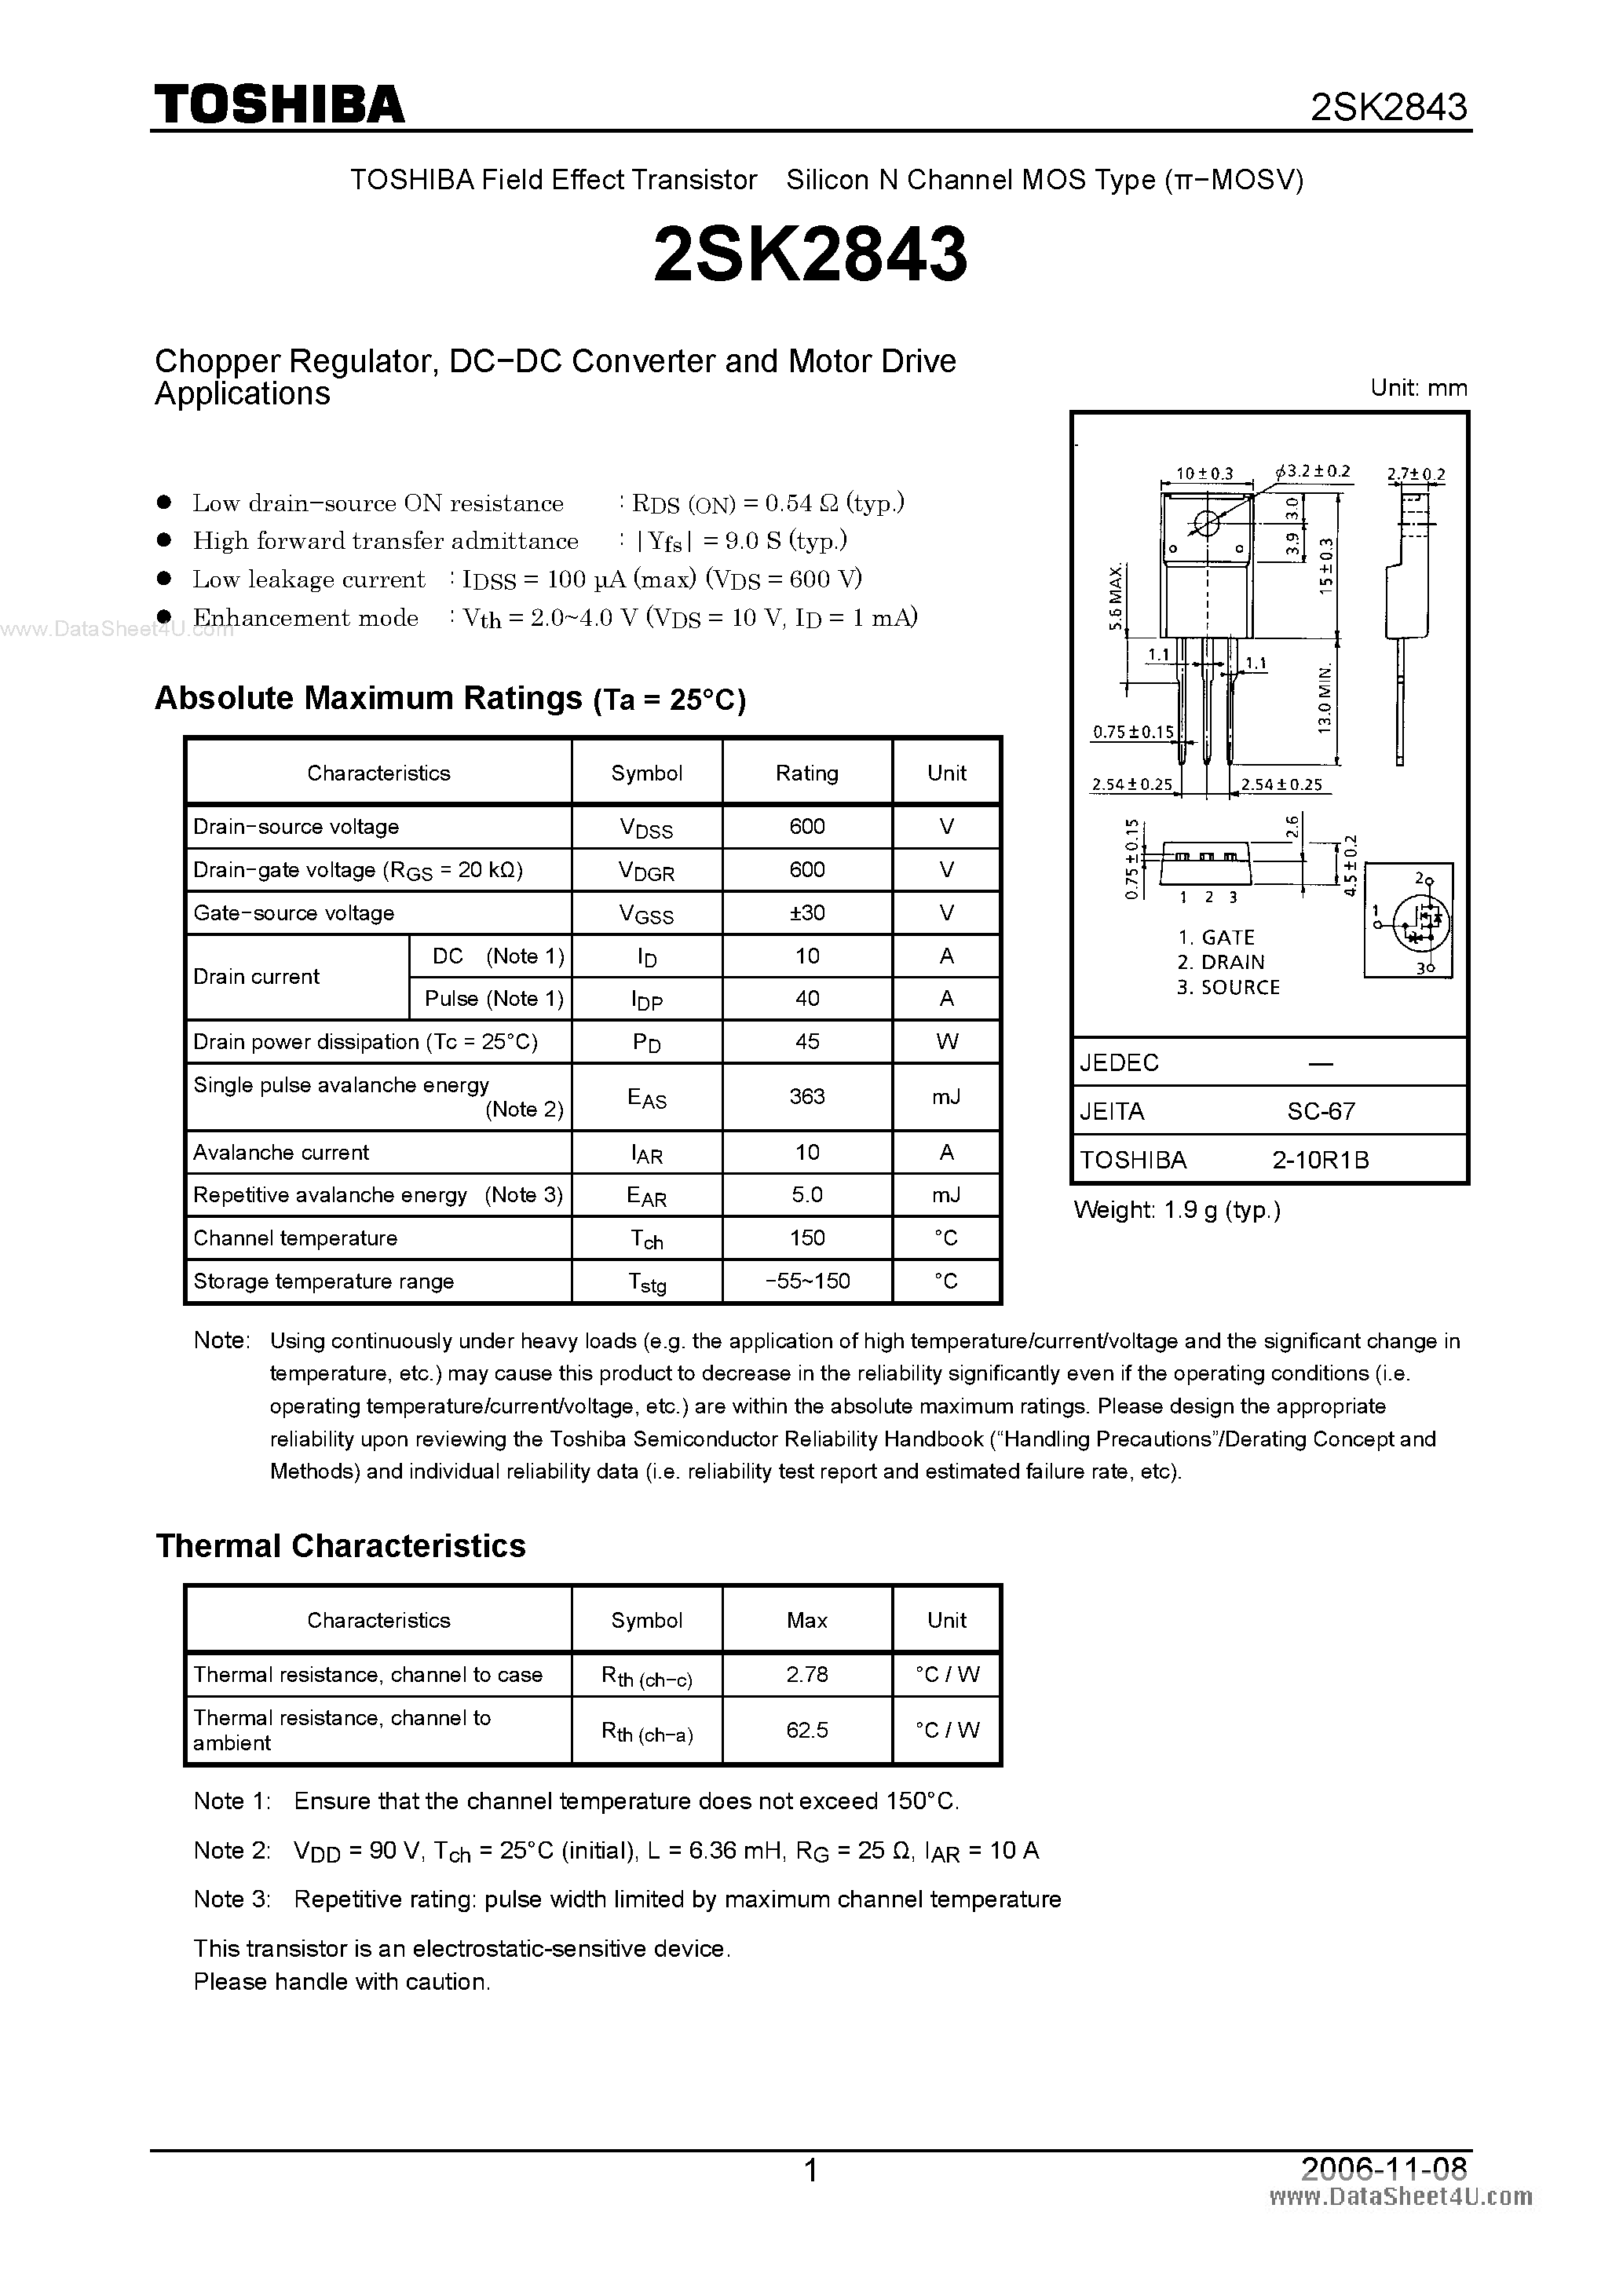 Datasheet K2843 - Search -----> 2SK2843 page 1